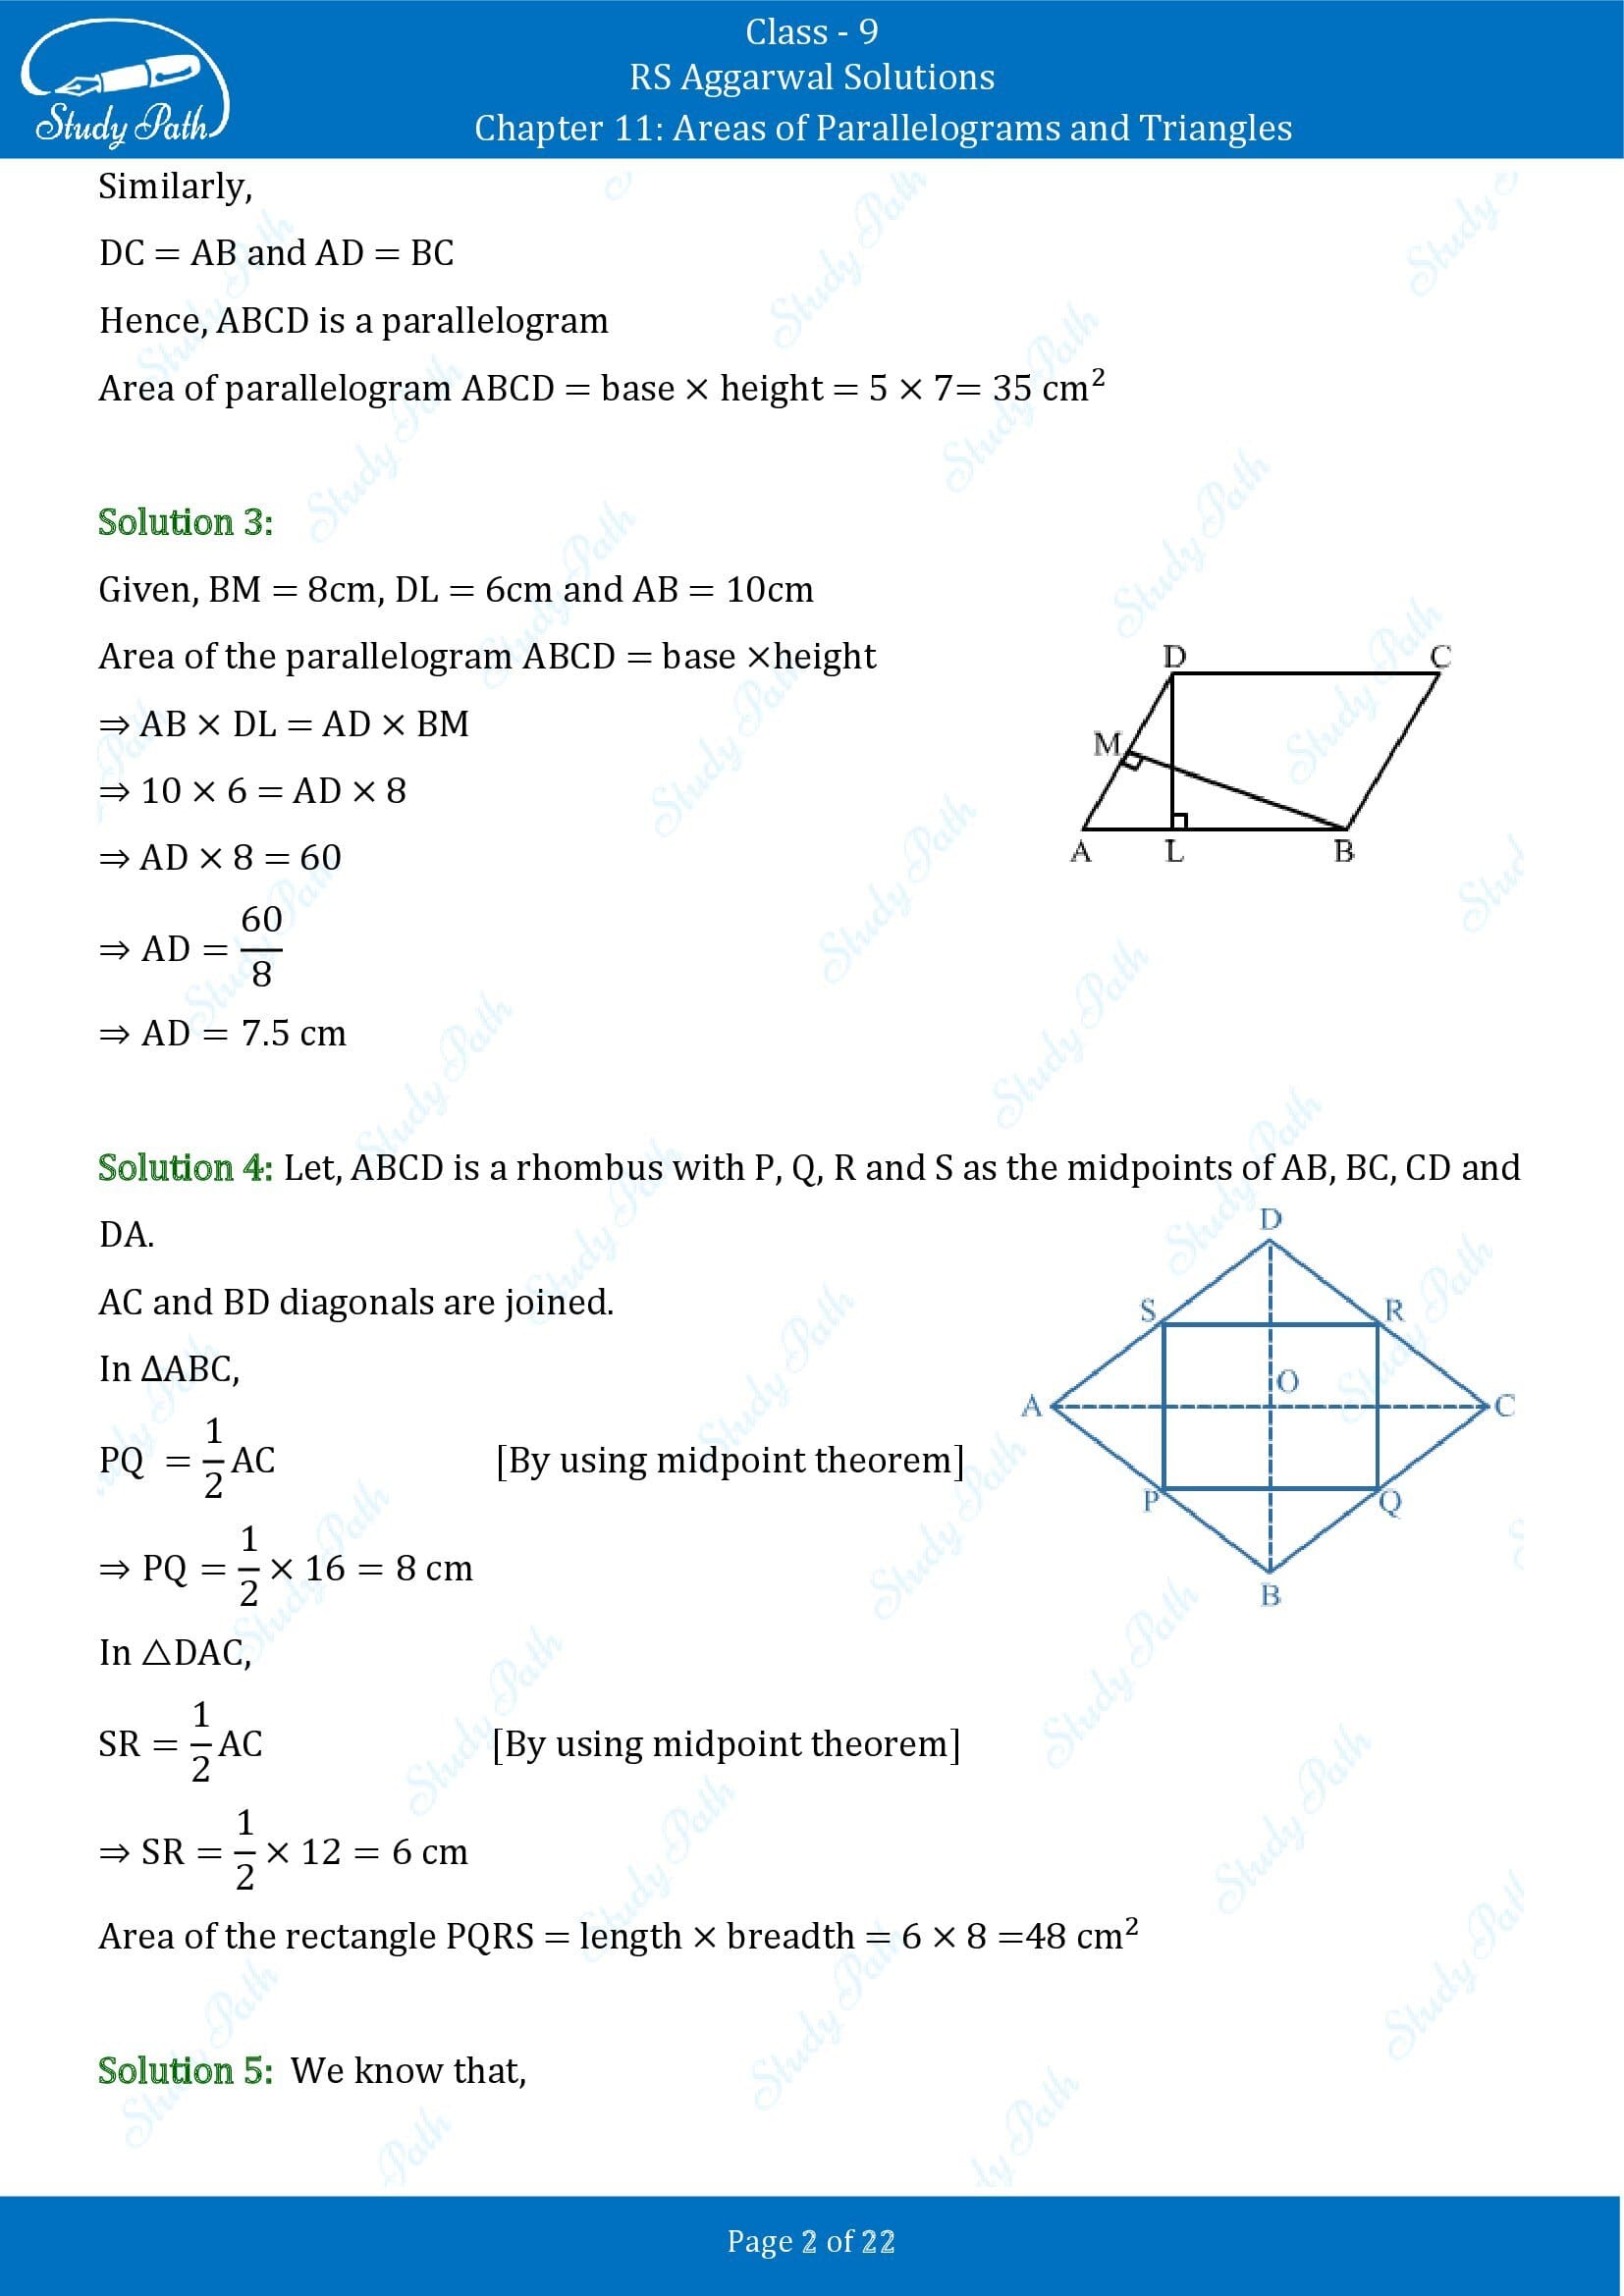 RS Aggarwal Solutions Class 9 Chapter 11 Areas of Parallelograms and Triangles Exercise 11 00002